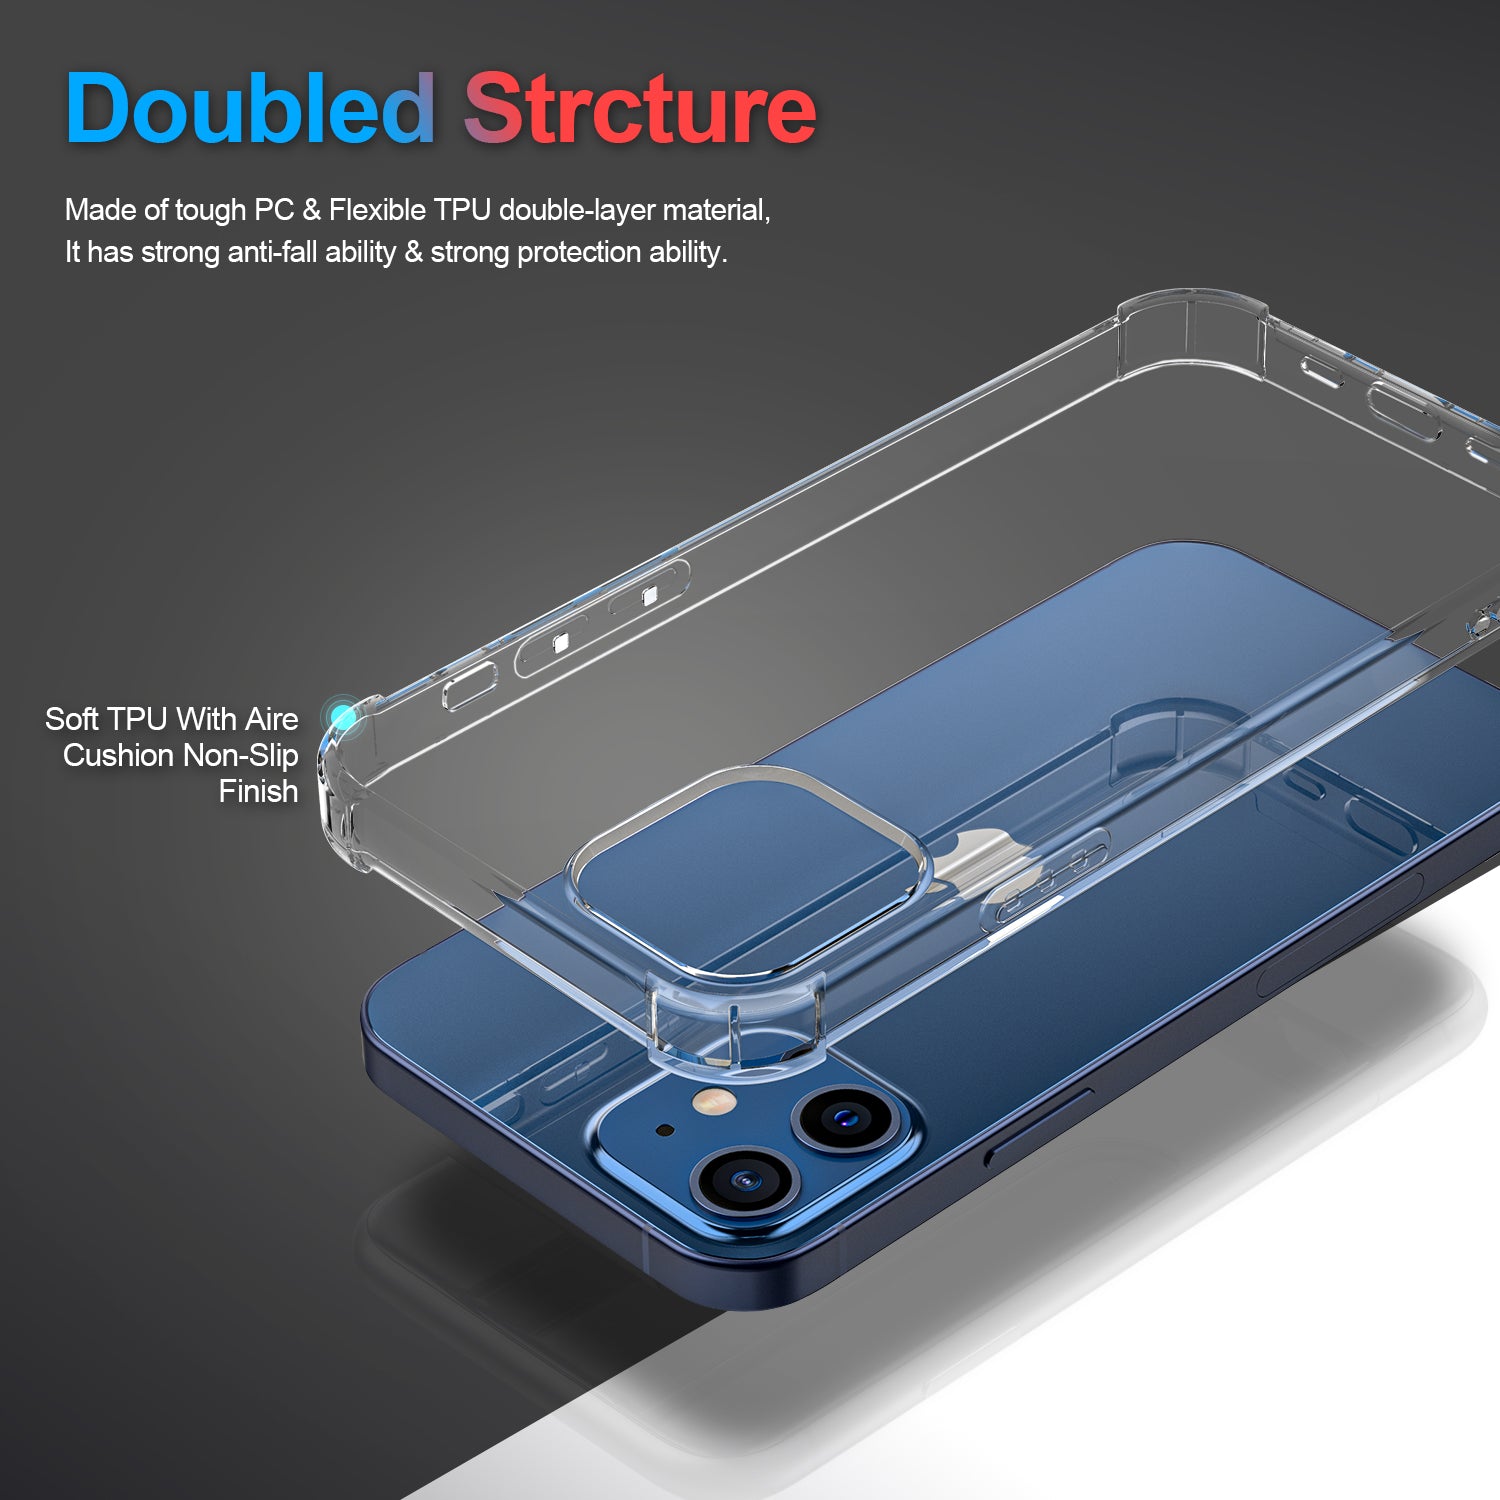 ORIbox Case Compatible with iPhone Xs Max Case, Heavy Duty Shockproof Anti-fall Clear Case